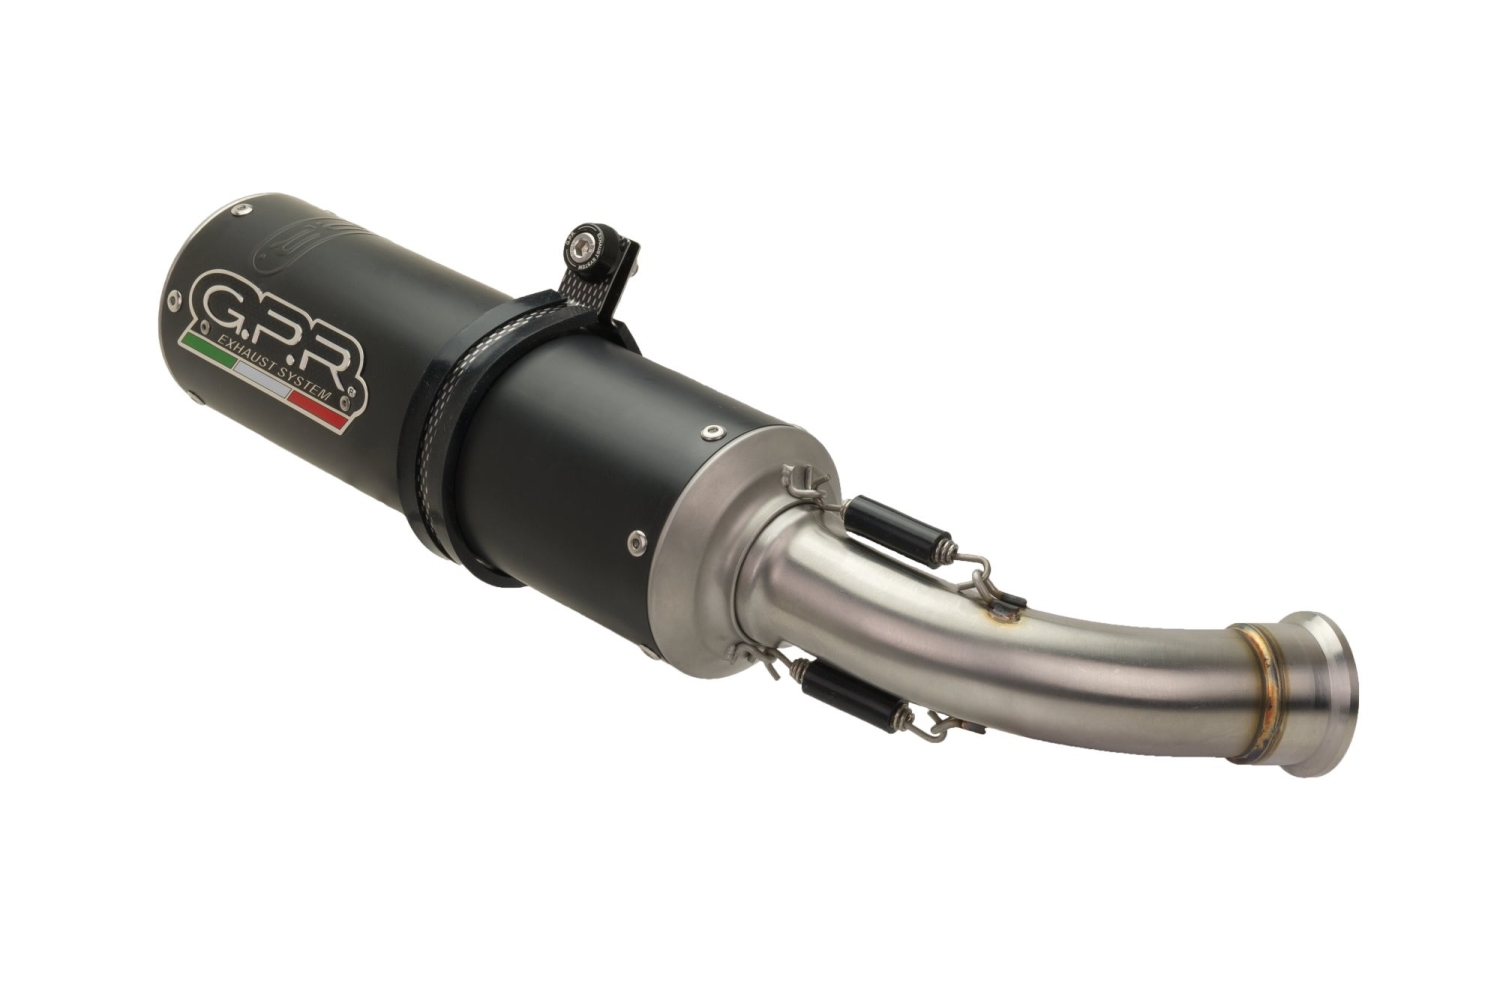 Exhaust system compatible with Zontes Gk 125 2022-2024, M3 Black Titanium, Homologated legal full system exhaust, including removable db killer and catalyst 